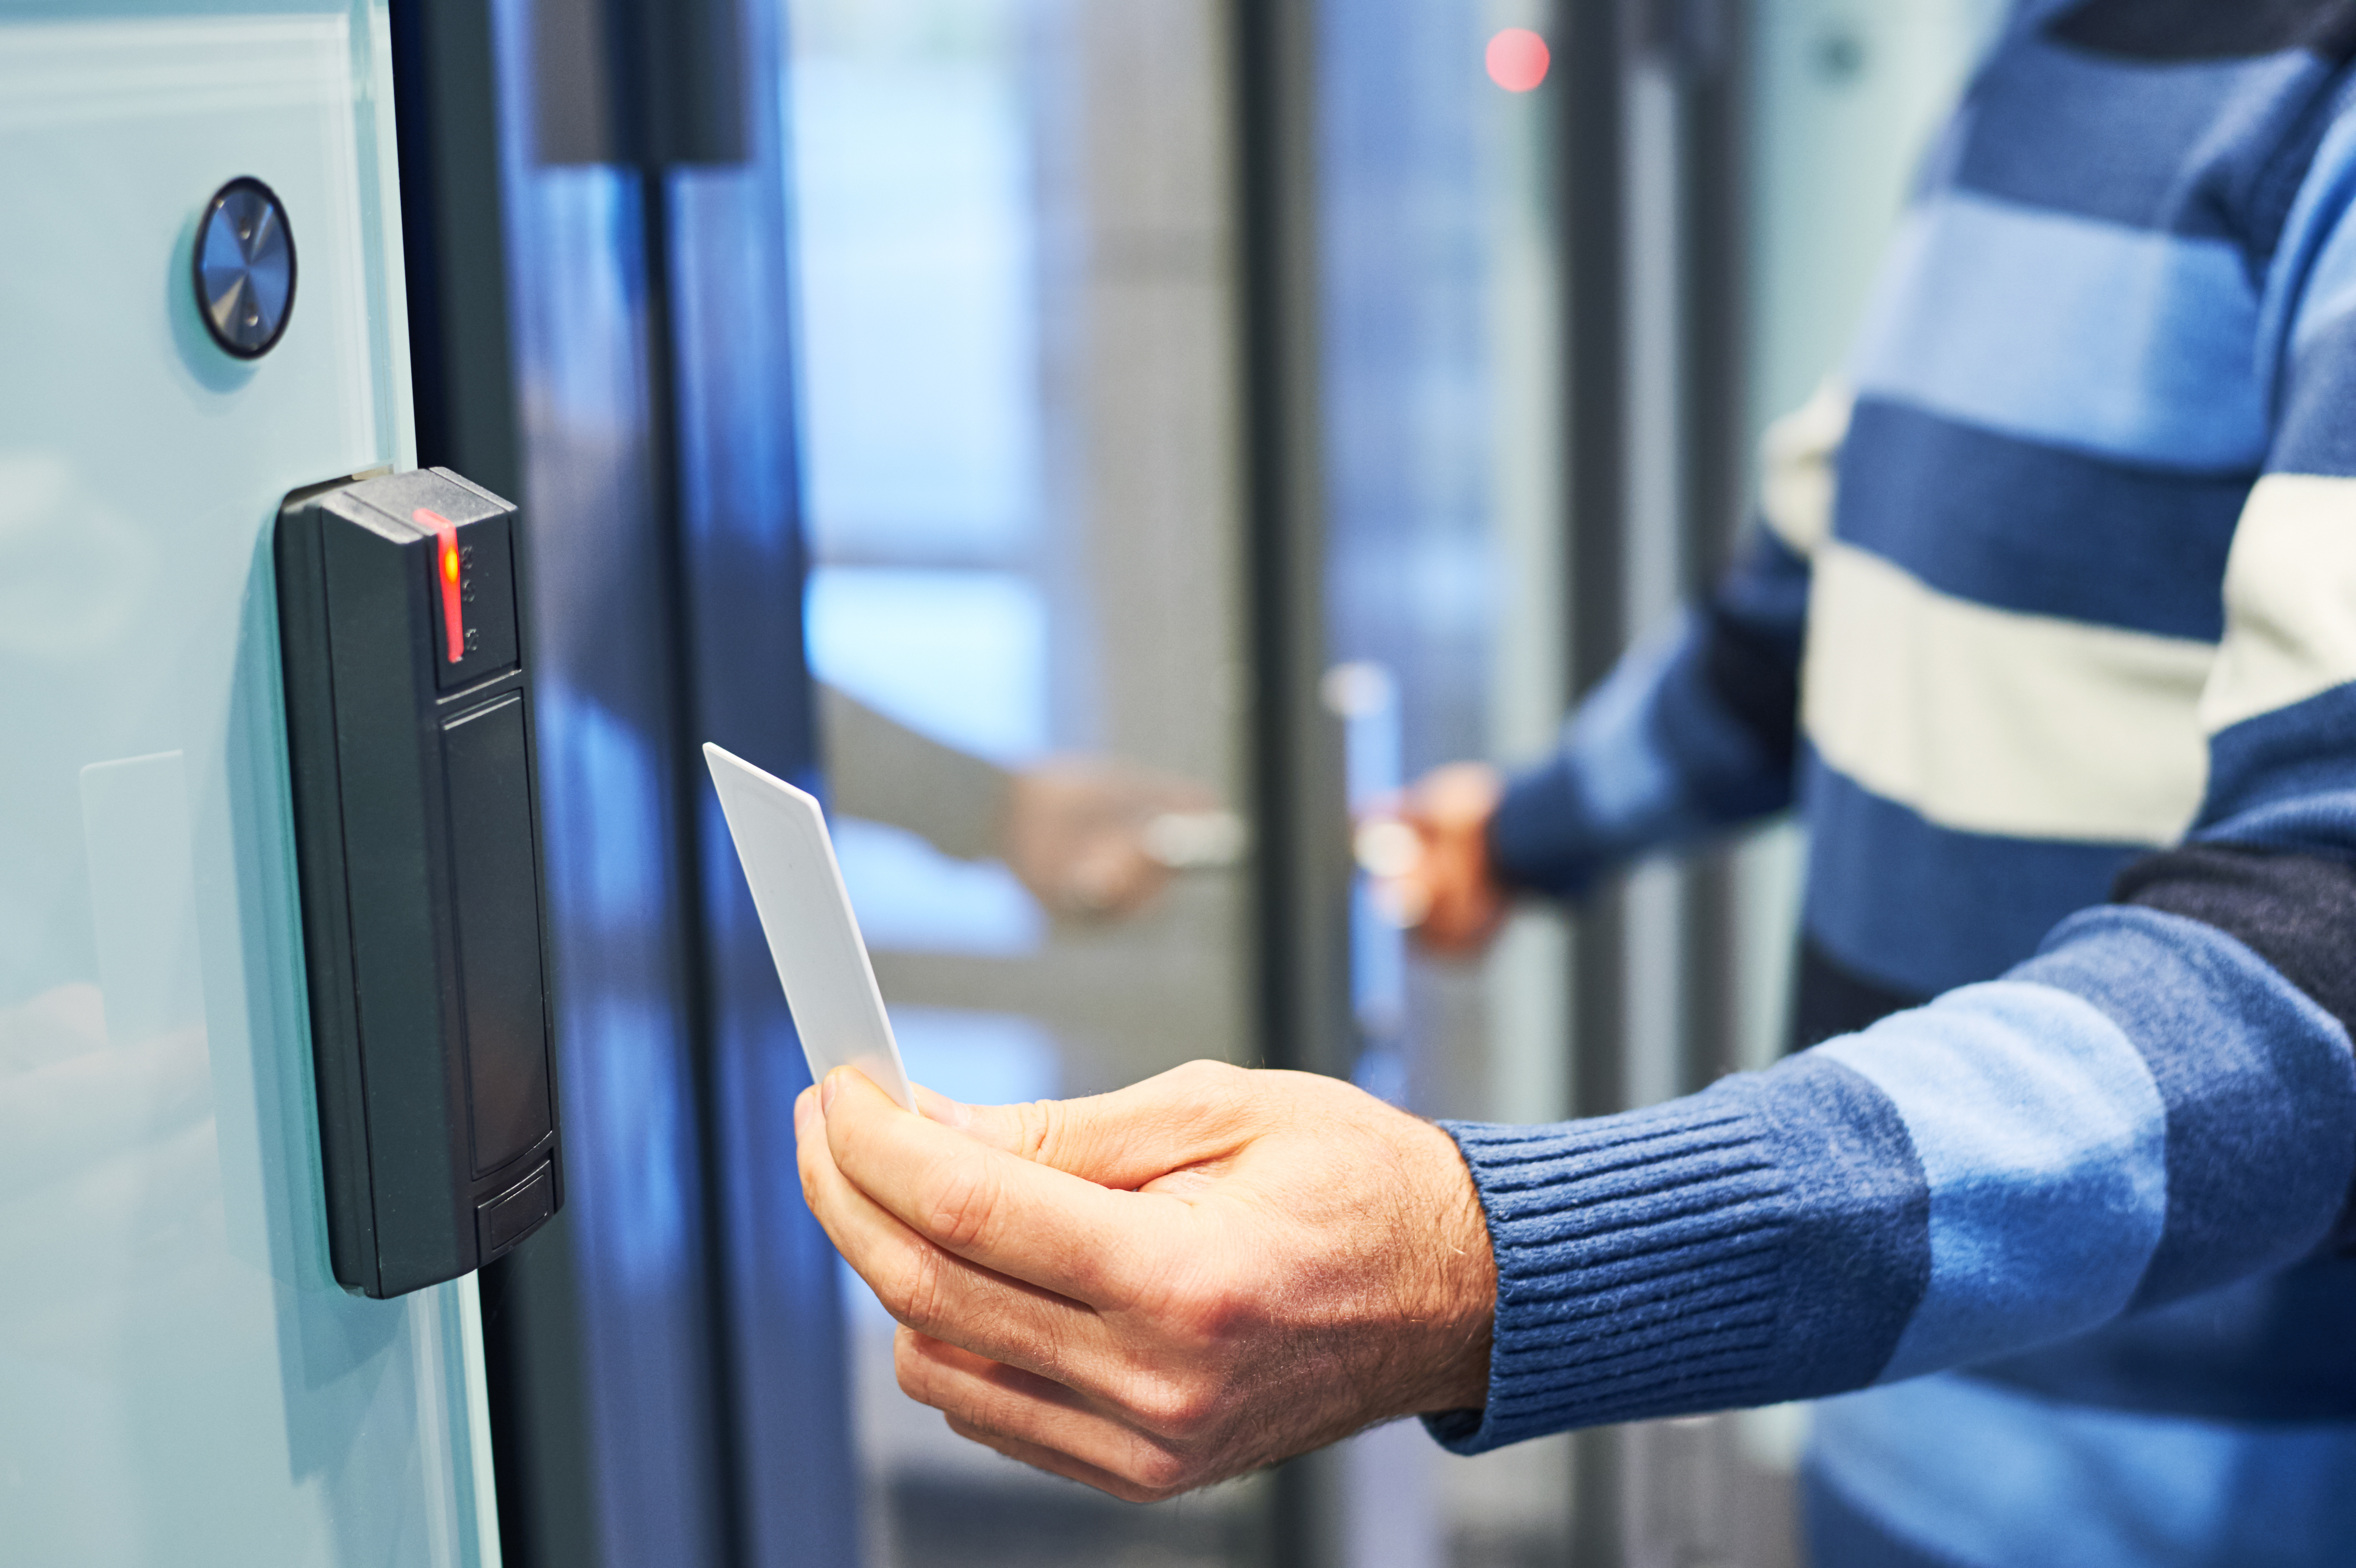 5 Reasons Access Control as a Service (ACaaS) Solutions Are In Demand